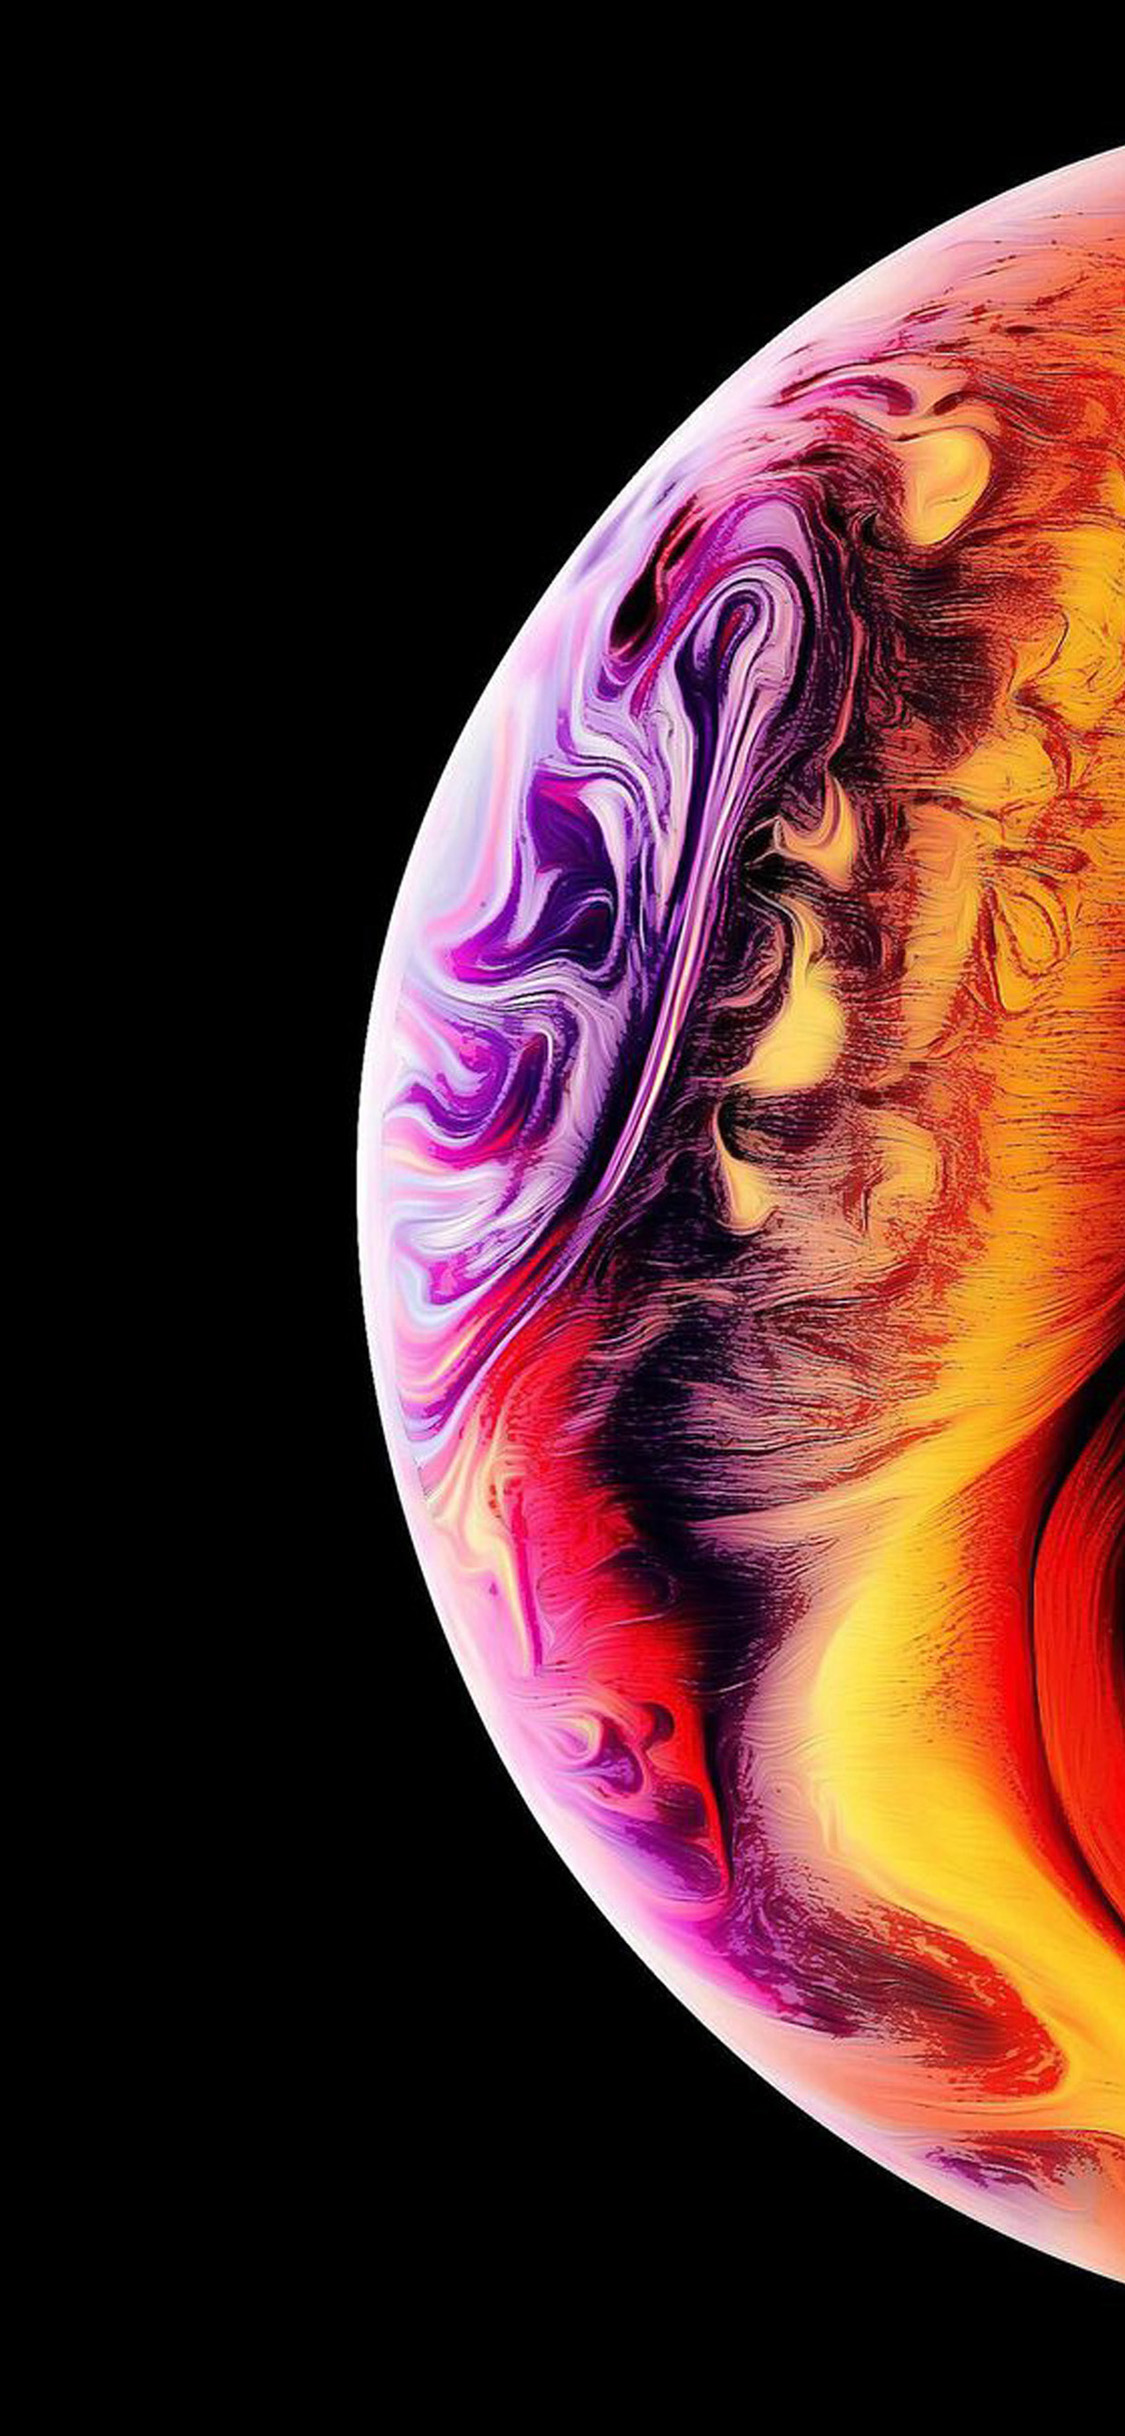 iPhone XS Stock Wallpapers - Download Best Full HD Resolution